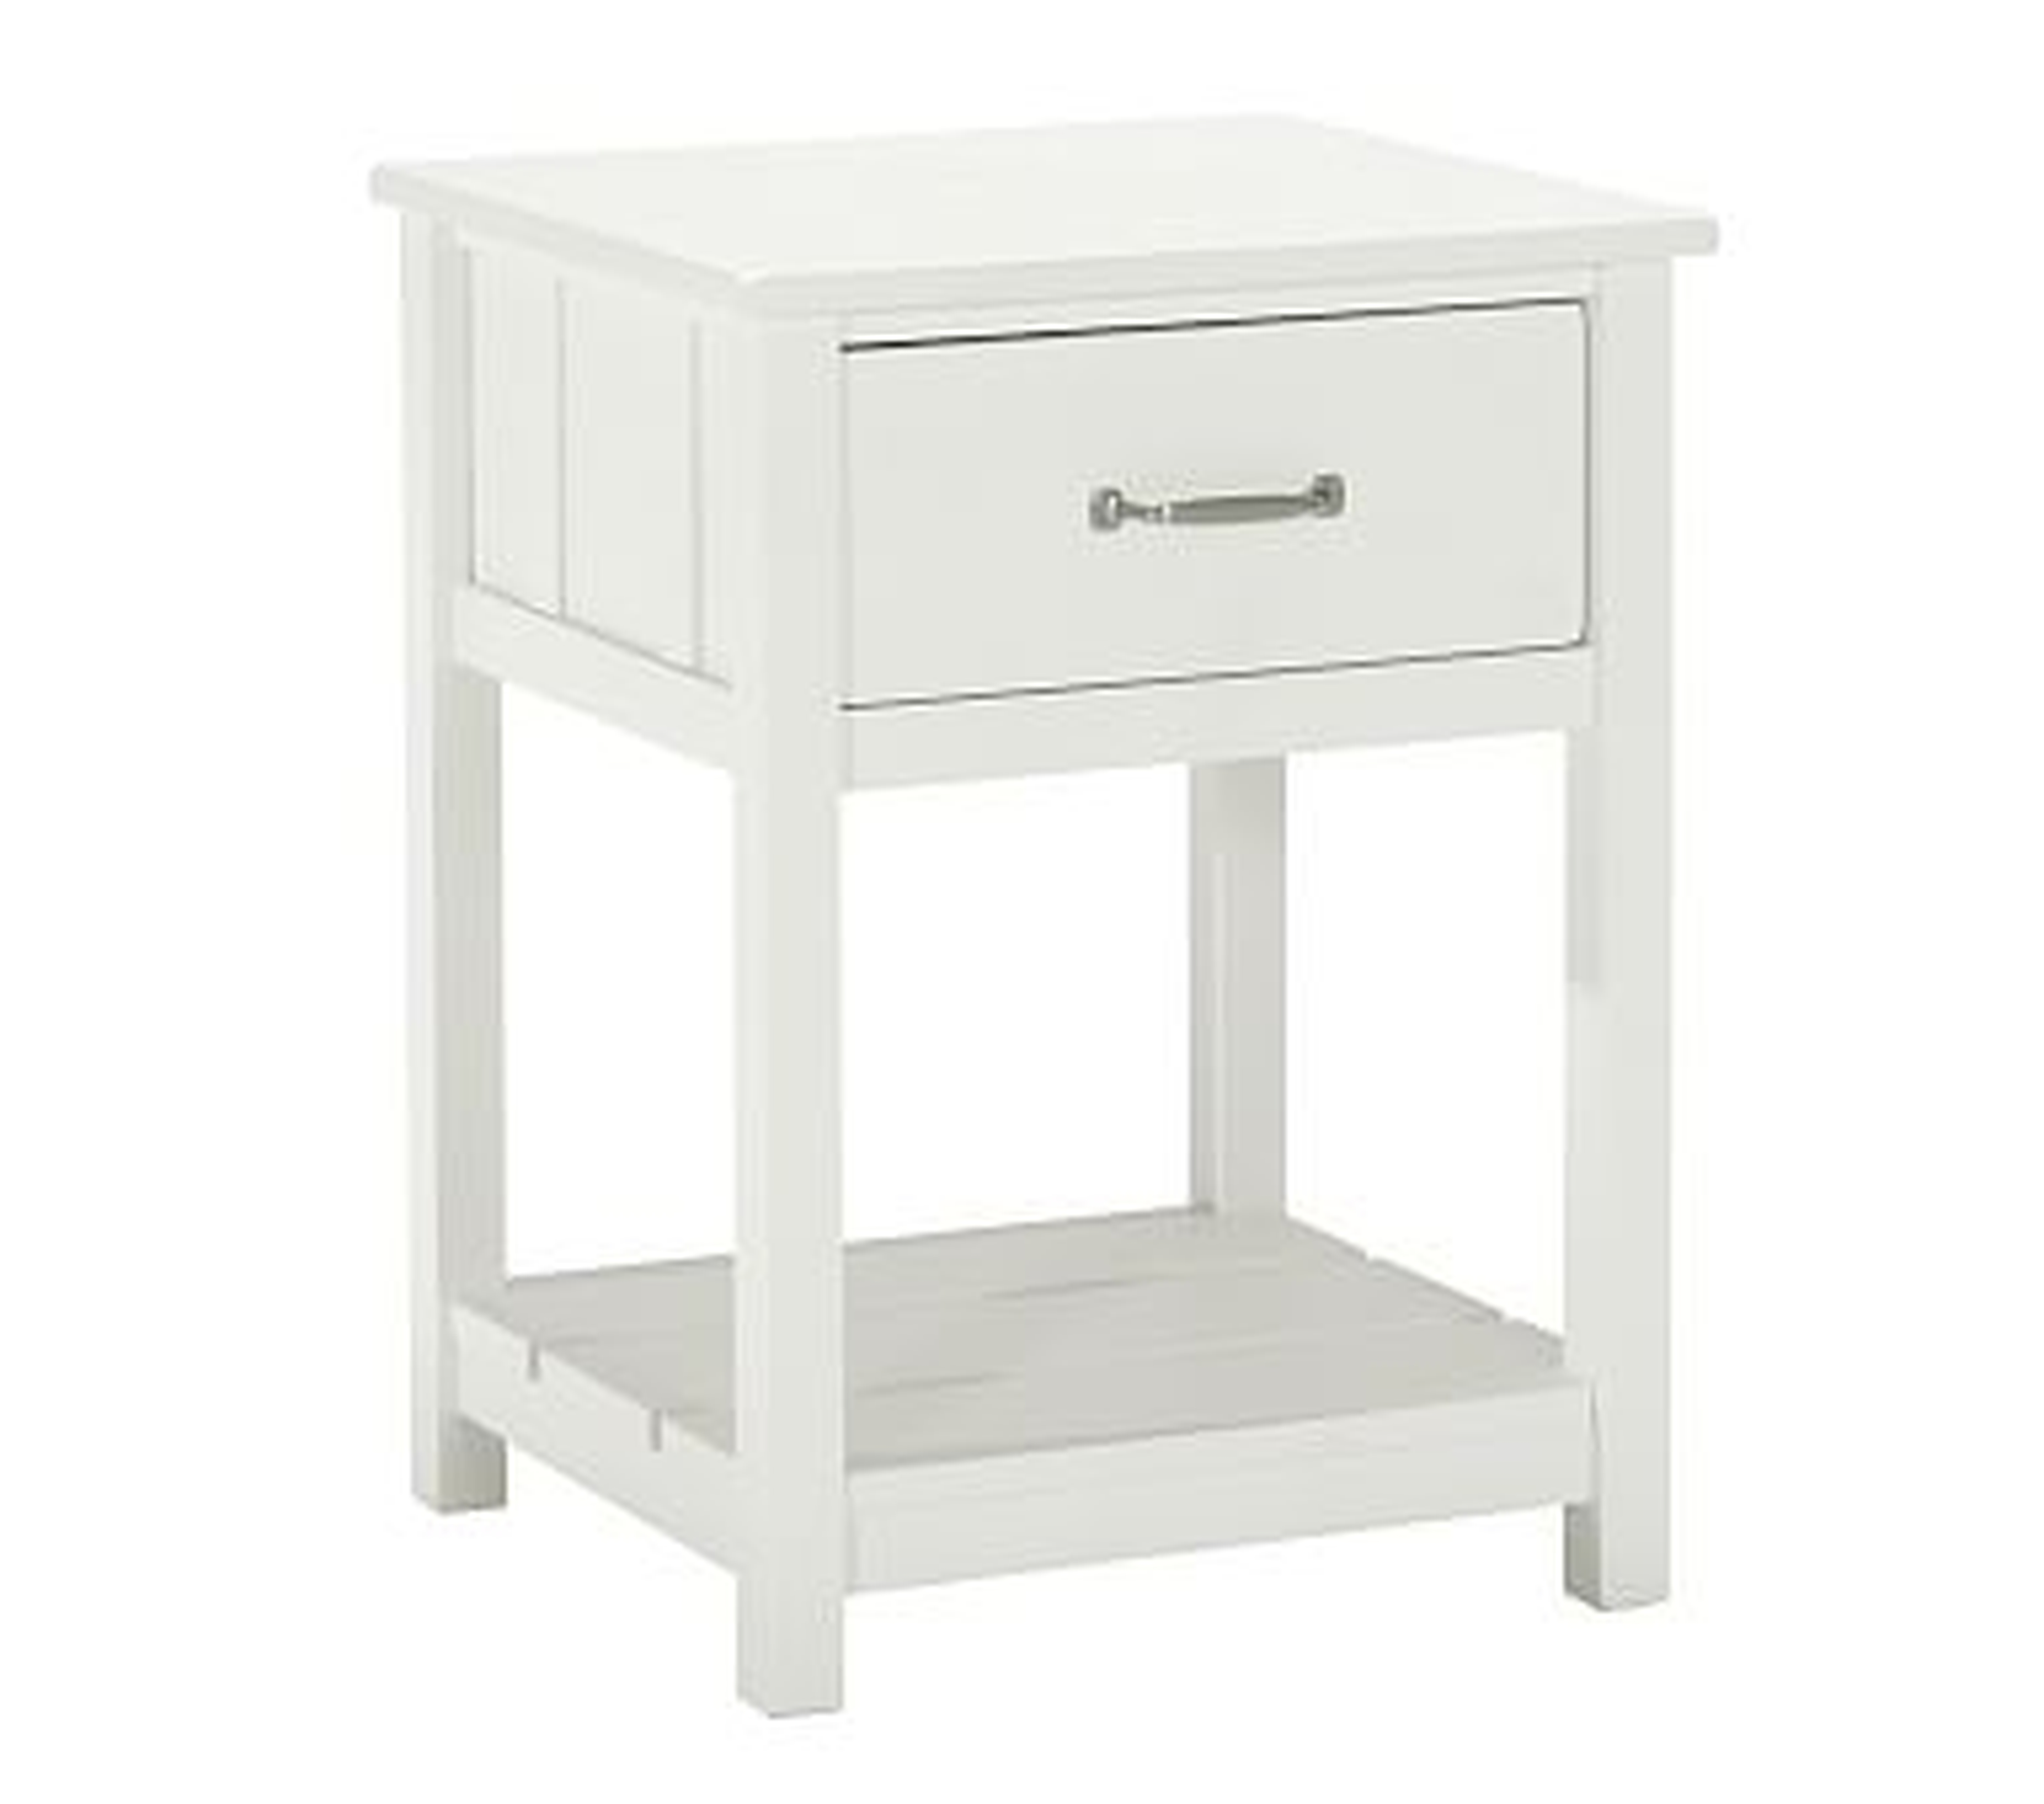 Camp Nightstand, Simply White, UPS Delivery - Pottery Barn Kids